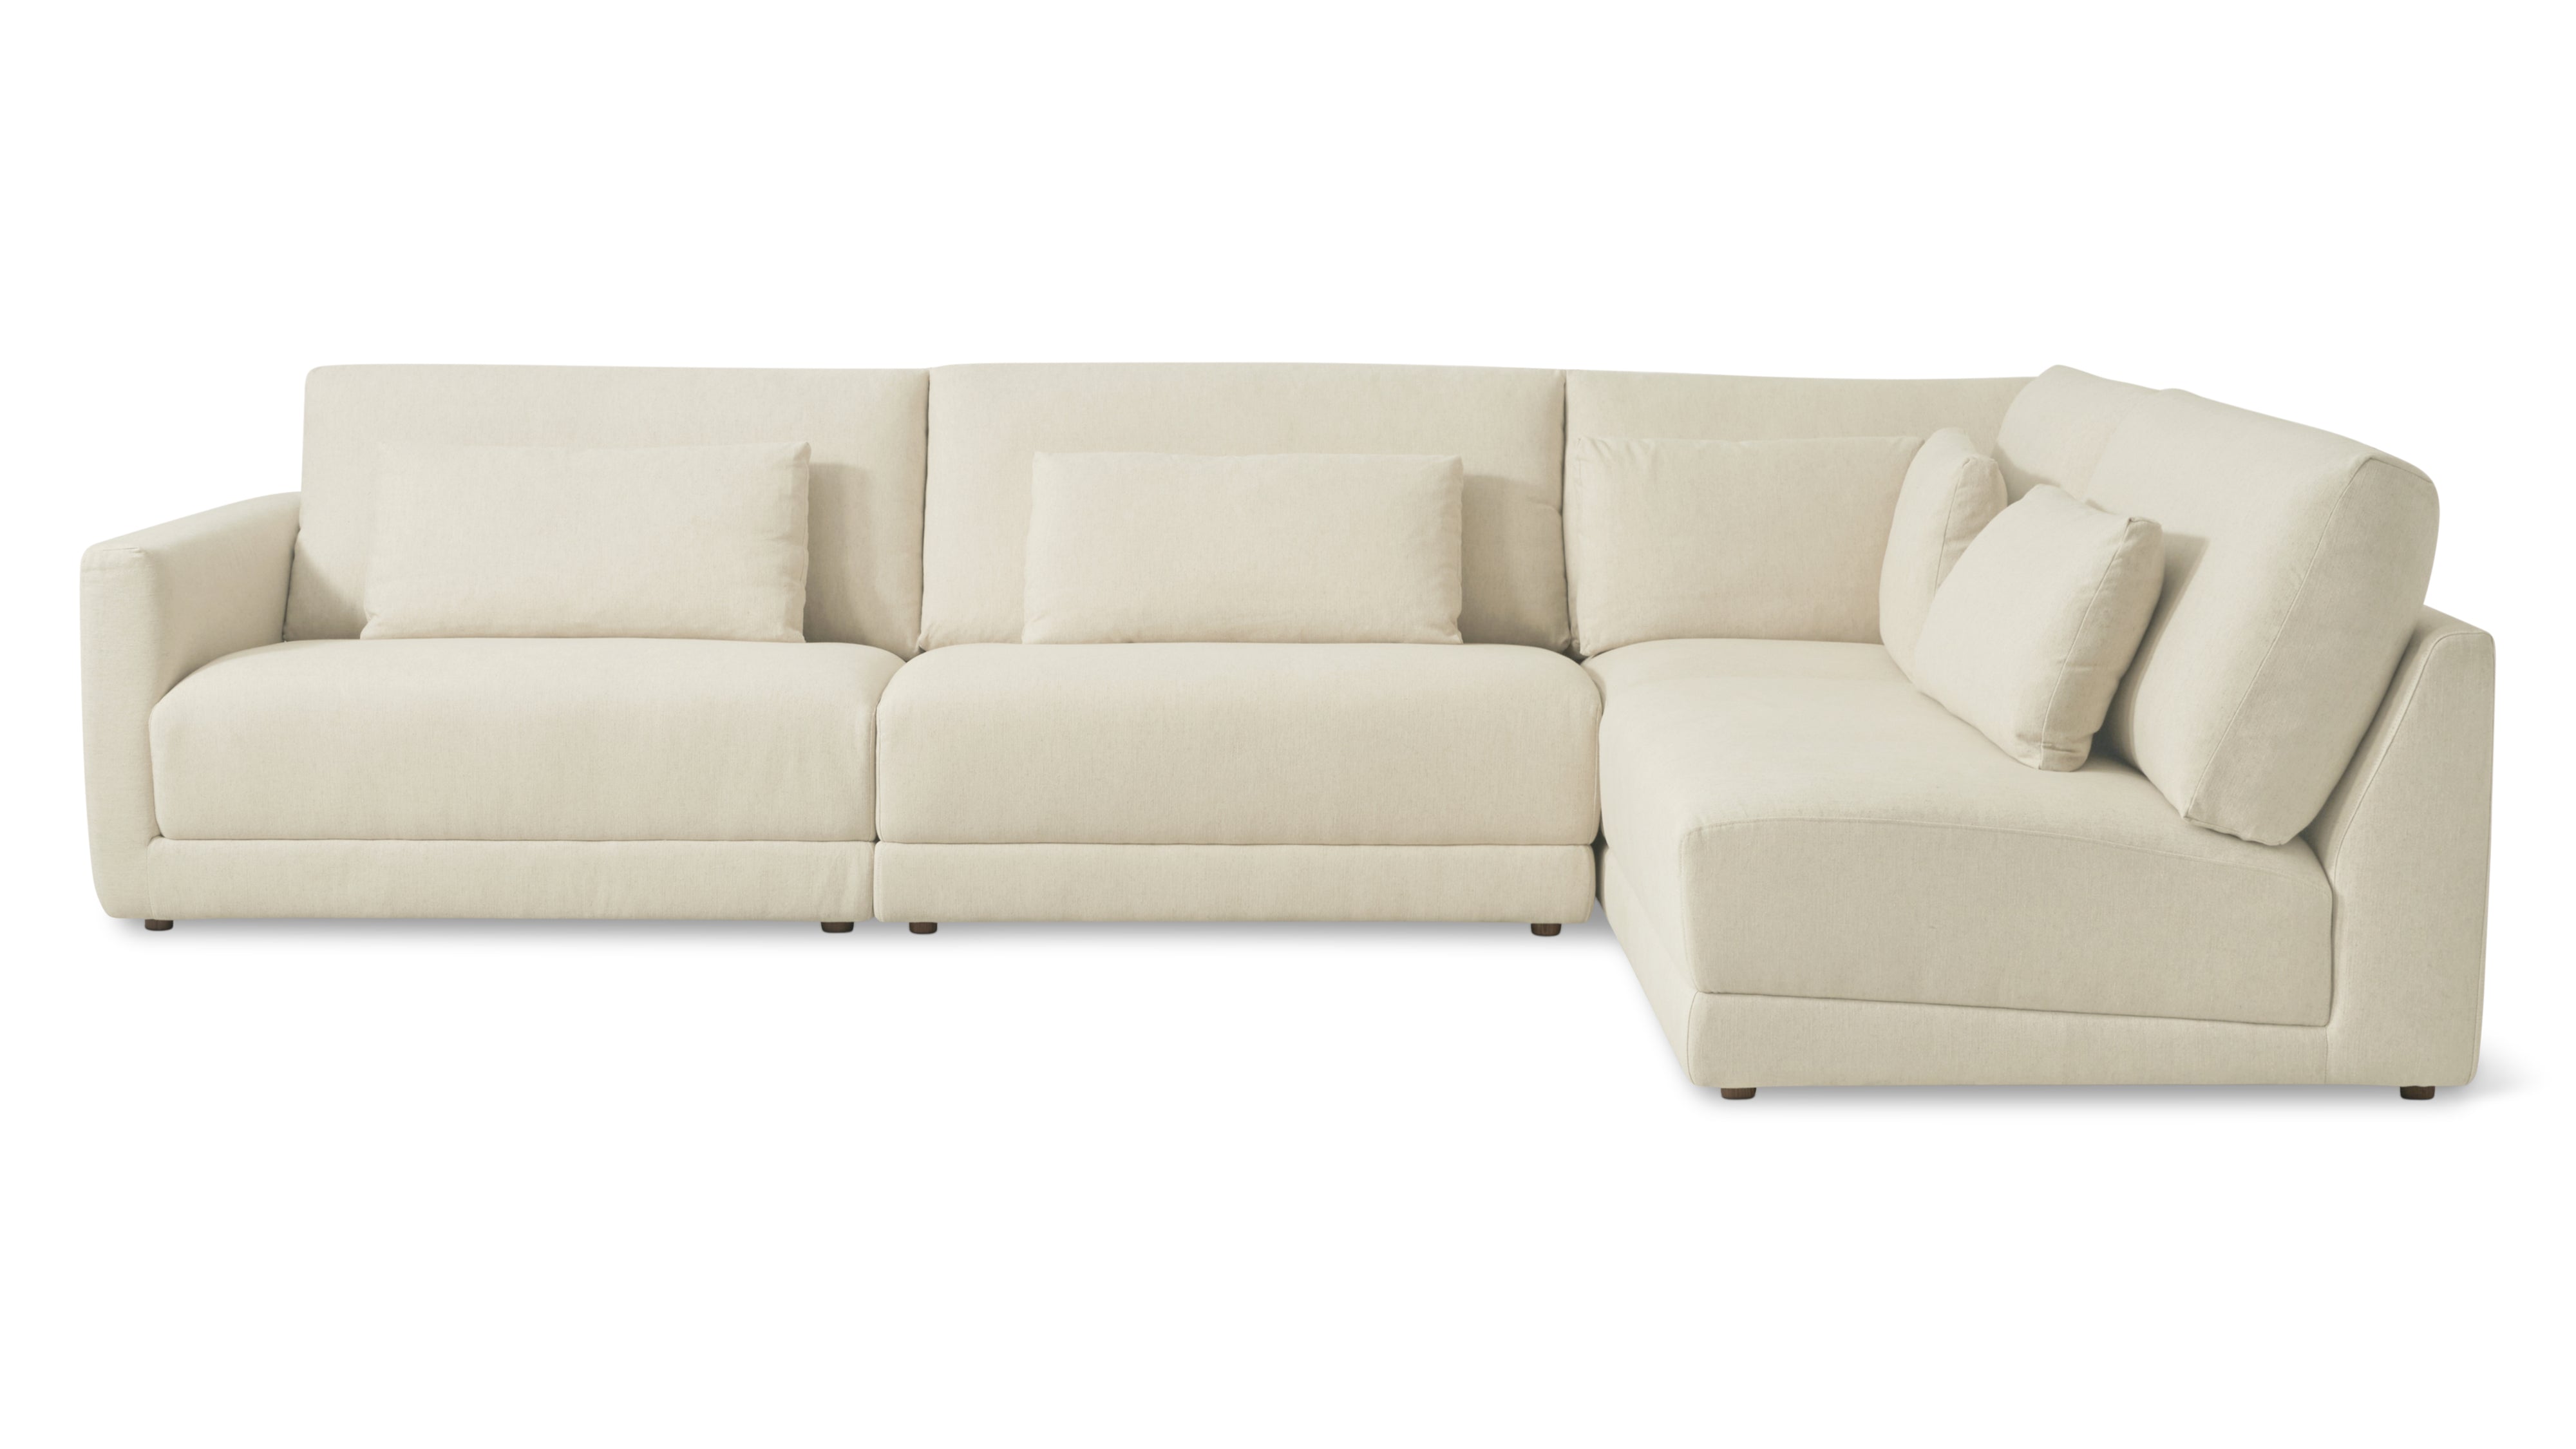 Wind Down 4-Piece Modular Sectional, Right, Beach - Image 1